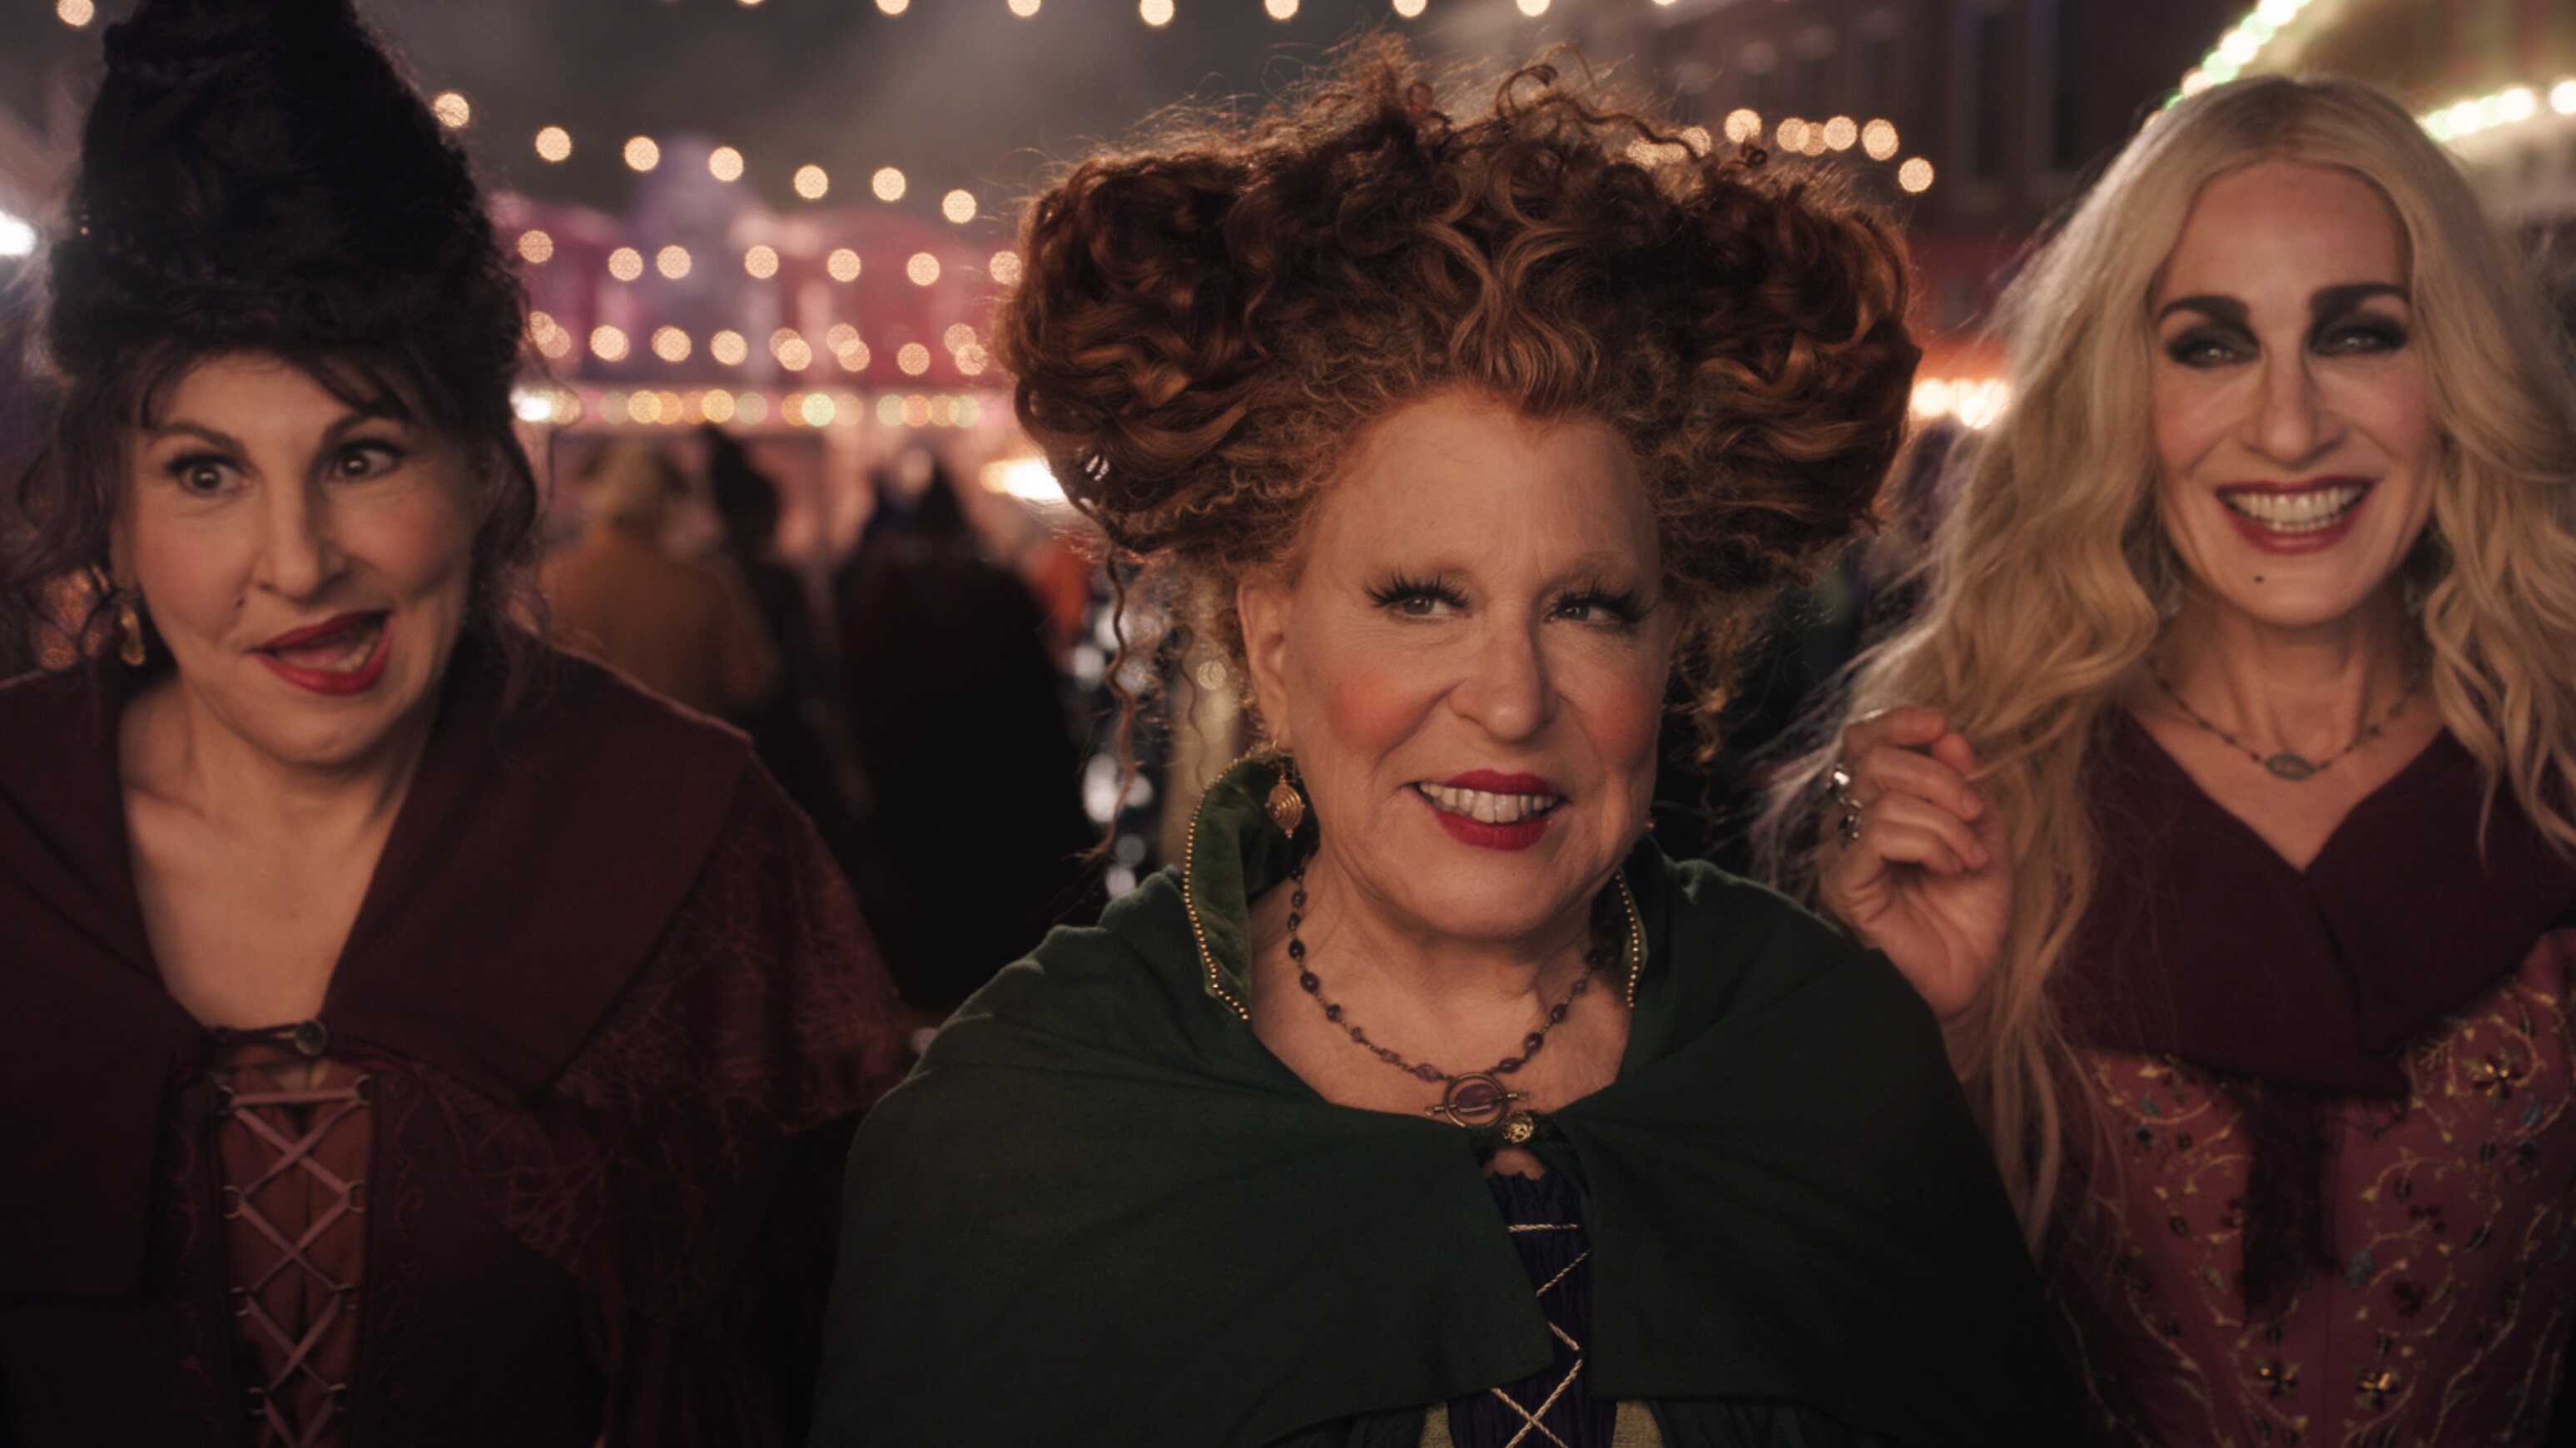 (L-R): Kathy Najimy as Mary Sanderson, Bette Midler as Winifred Sanderson, and Sarah Jessica Parker as Sarah Sanderson in Disney's live-action HOCUS POCUS 2, exclusively on Disney+. Photo courtesy of Disney Enterprises, Inc. © 2022 Disney Enterprises, Inc. All Rights Reserved.